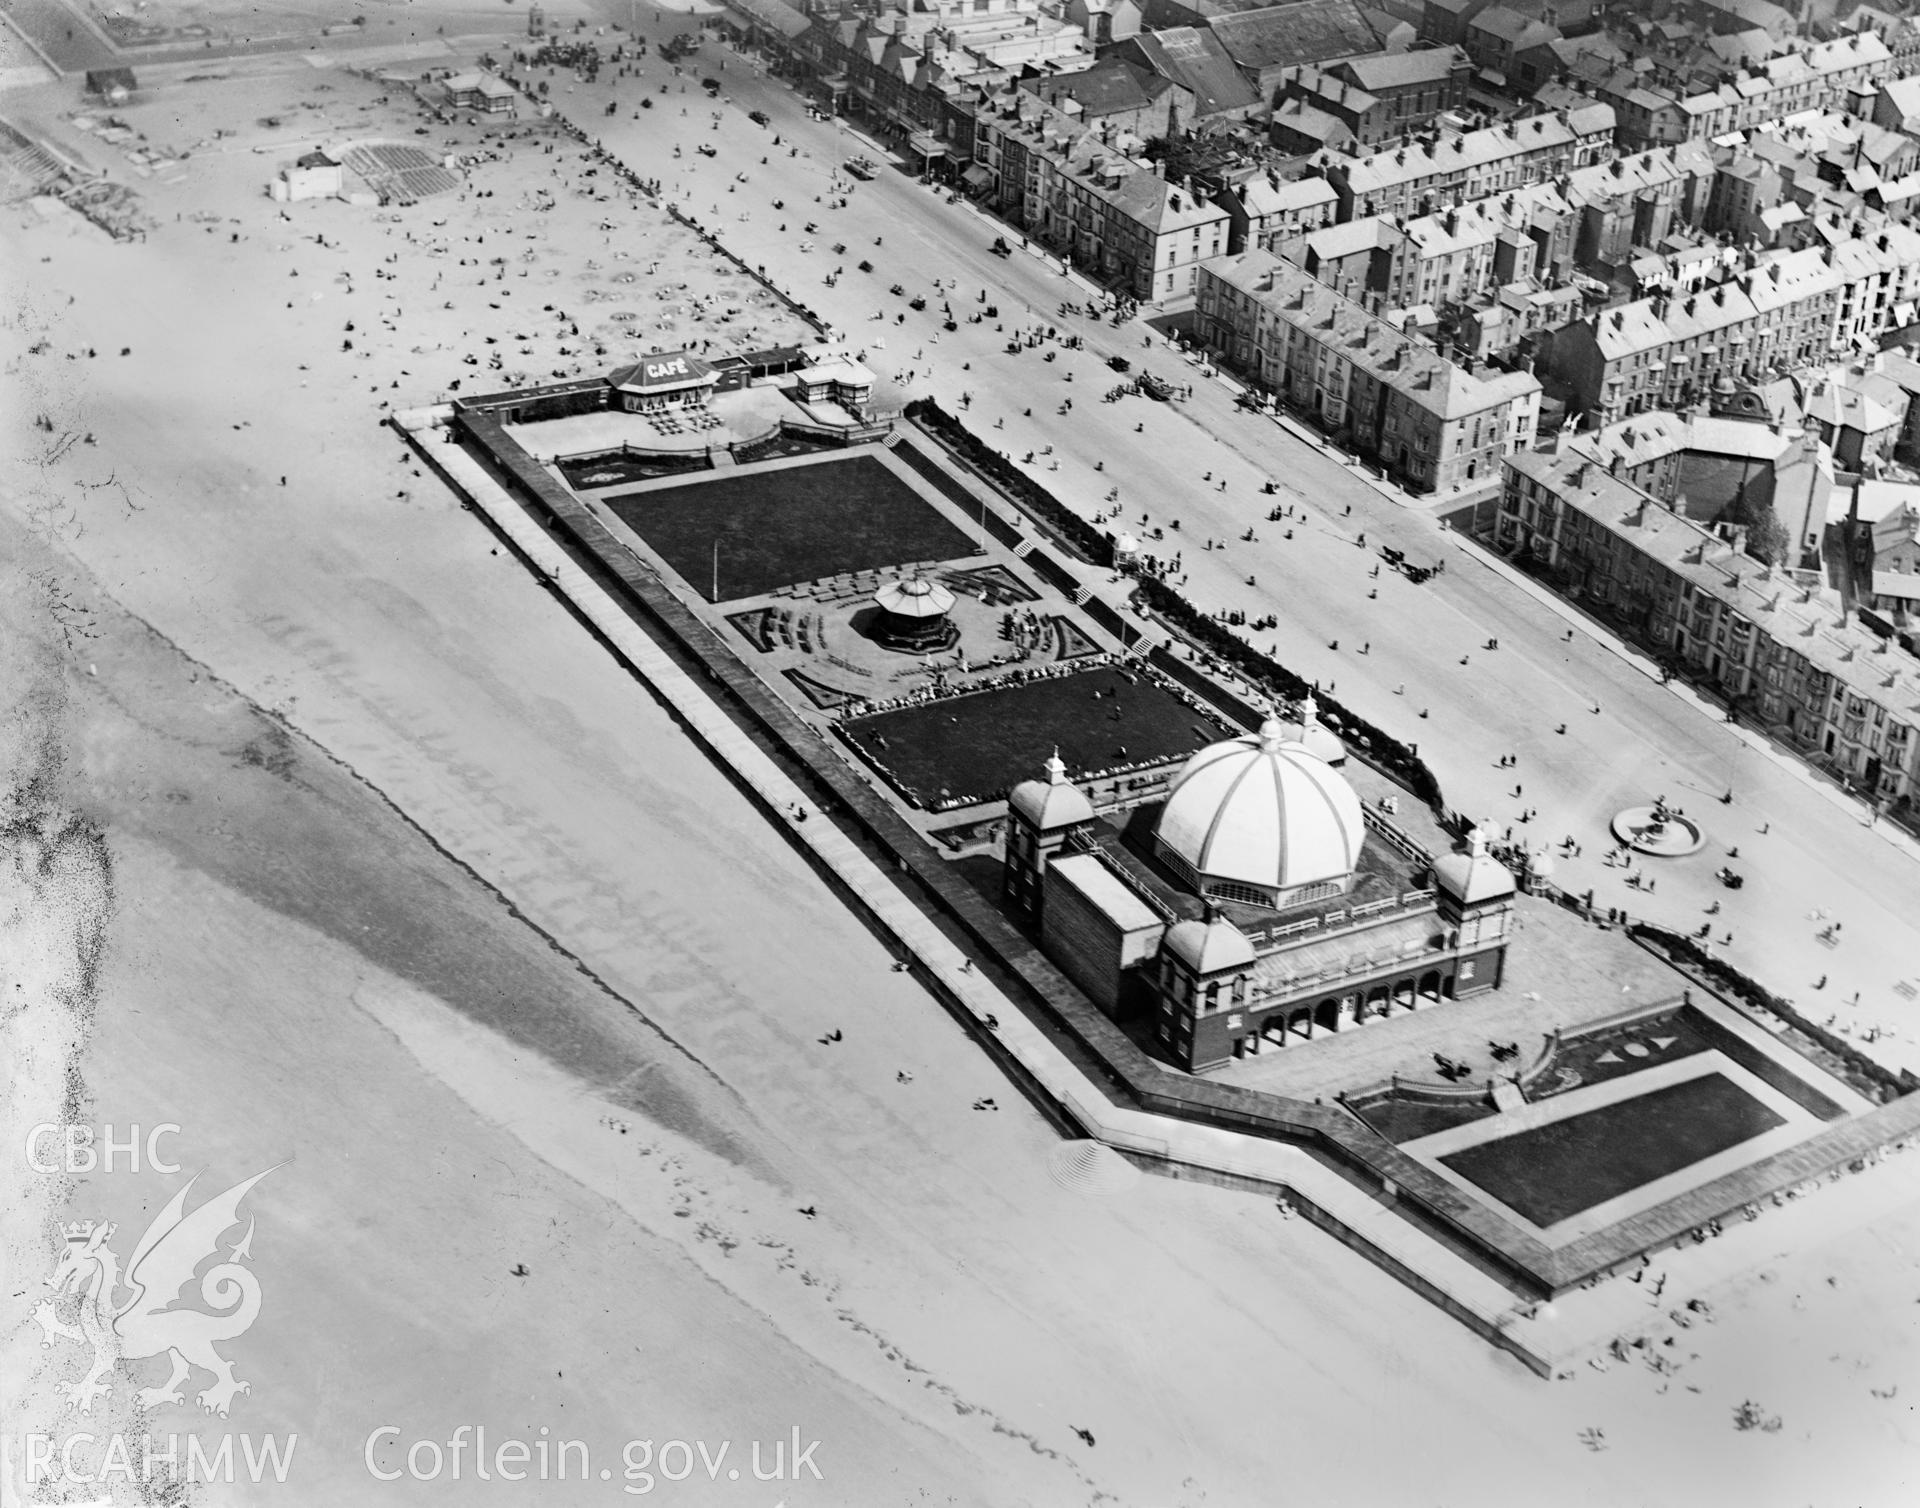 View of Rhyl showing the new pavillion and bandstand, oblique aerial view. 5?x4? black and white glass plate negative.